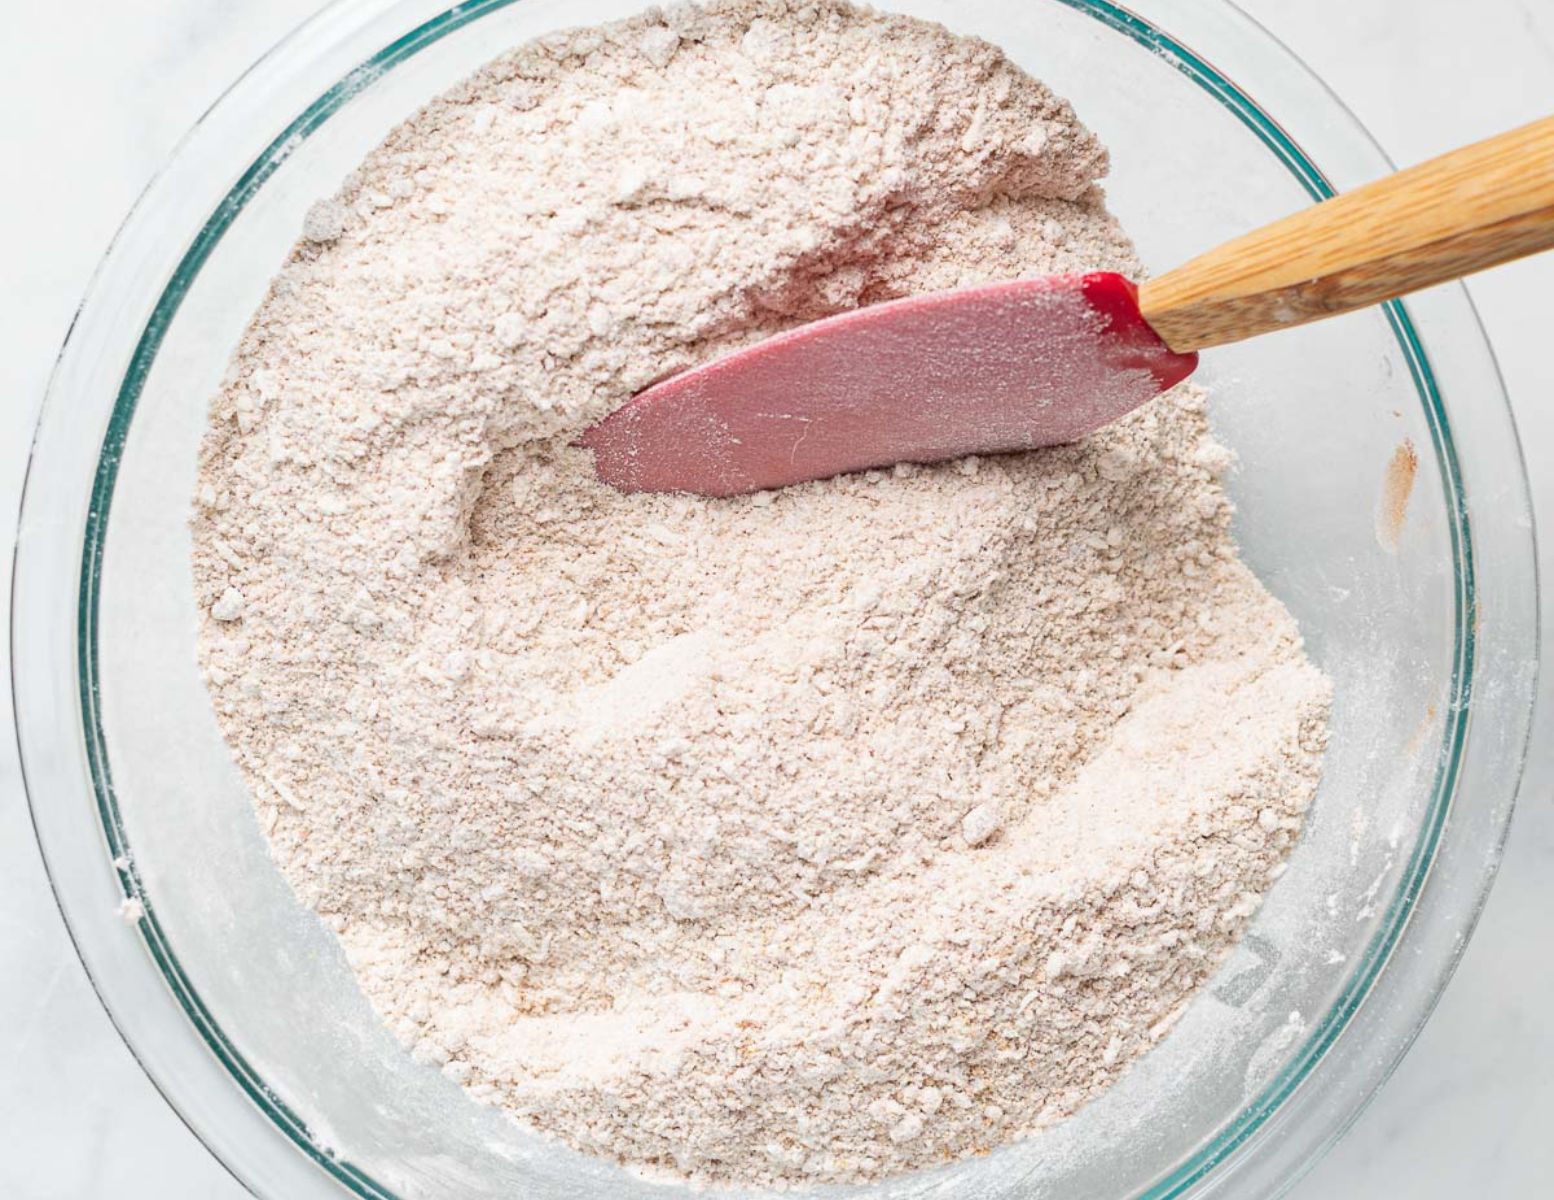 dry cake ingredients in a bowl